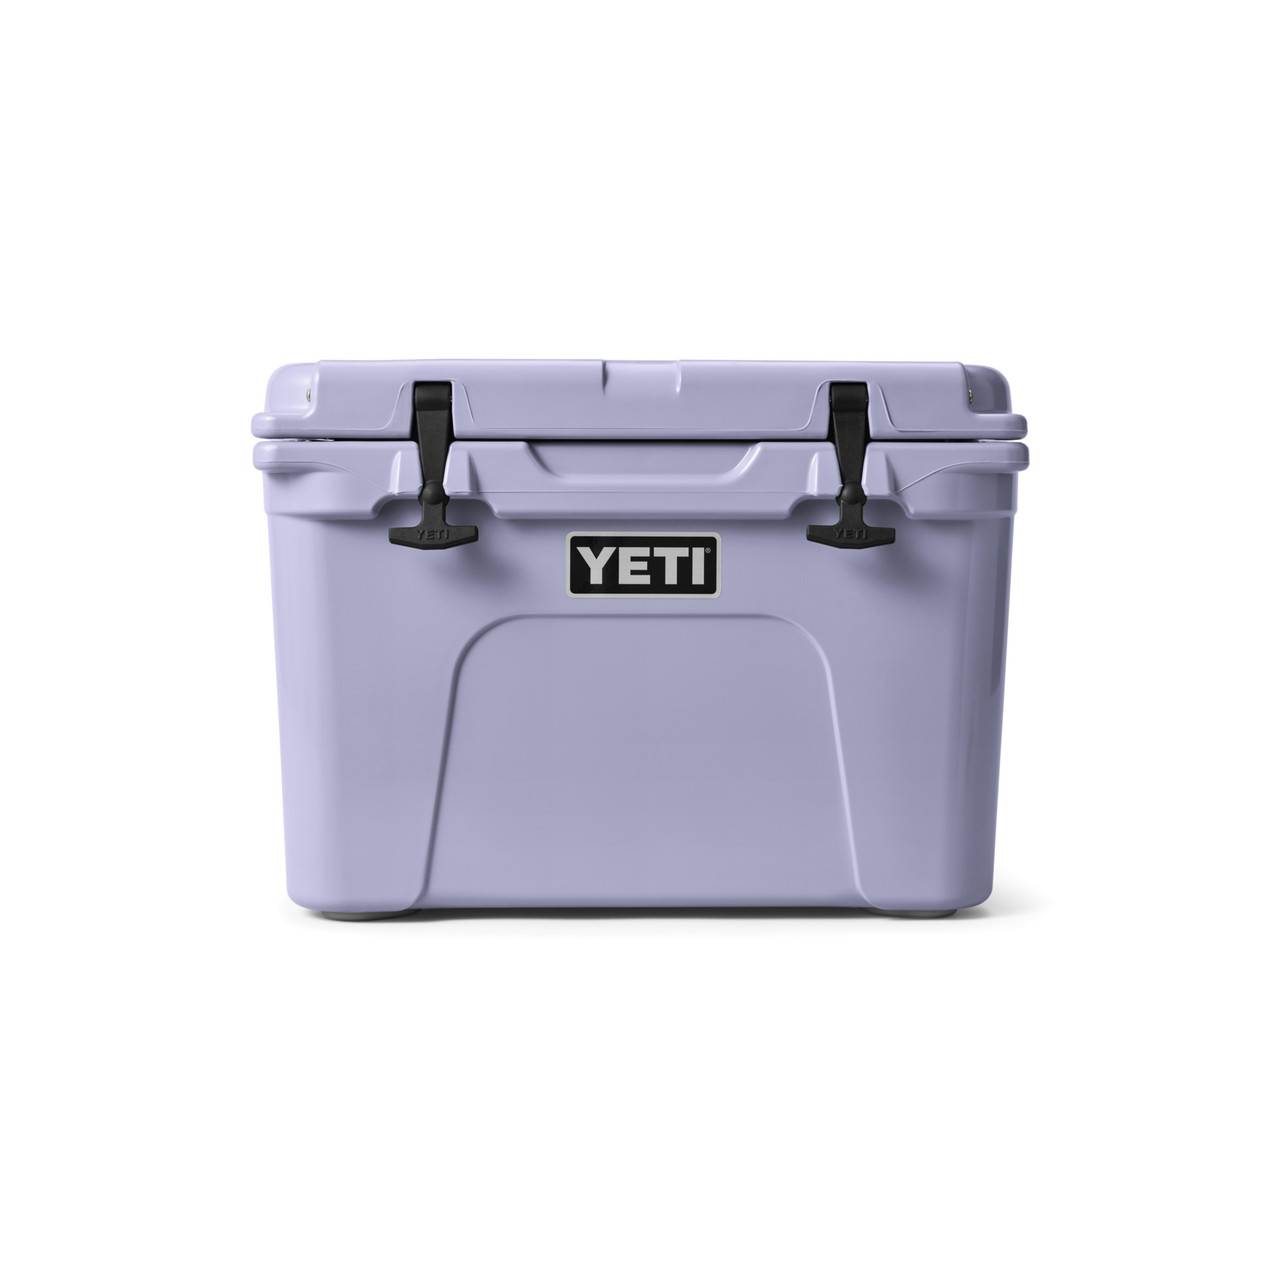 Yeti came out with their new seasonal colors and this Cosmic Lilac